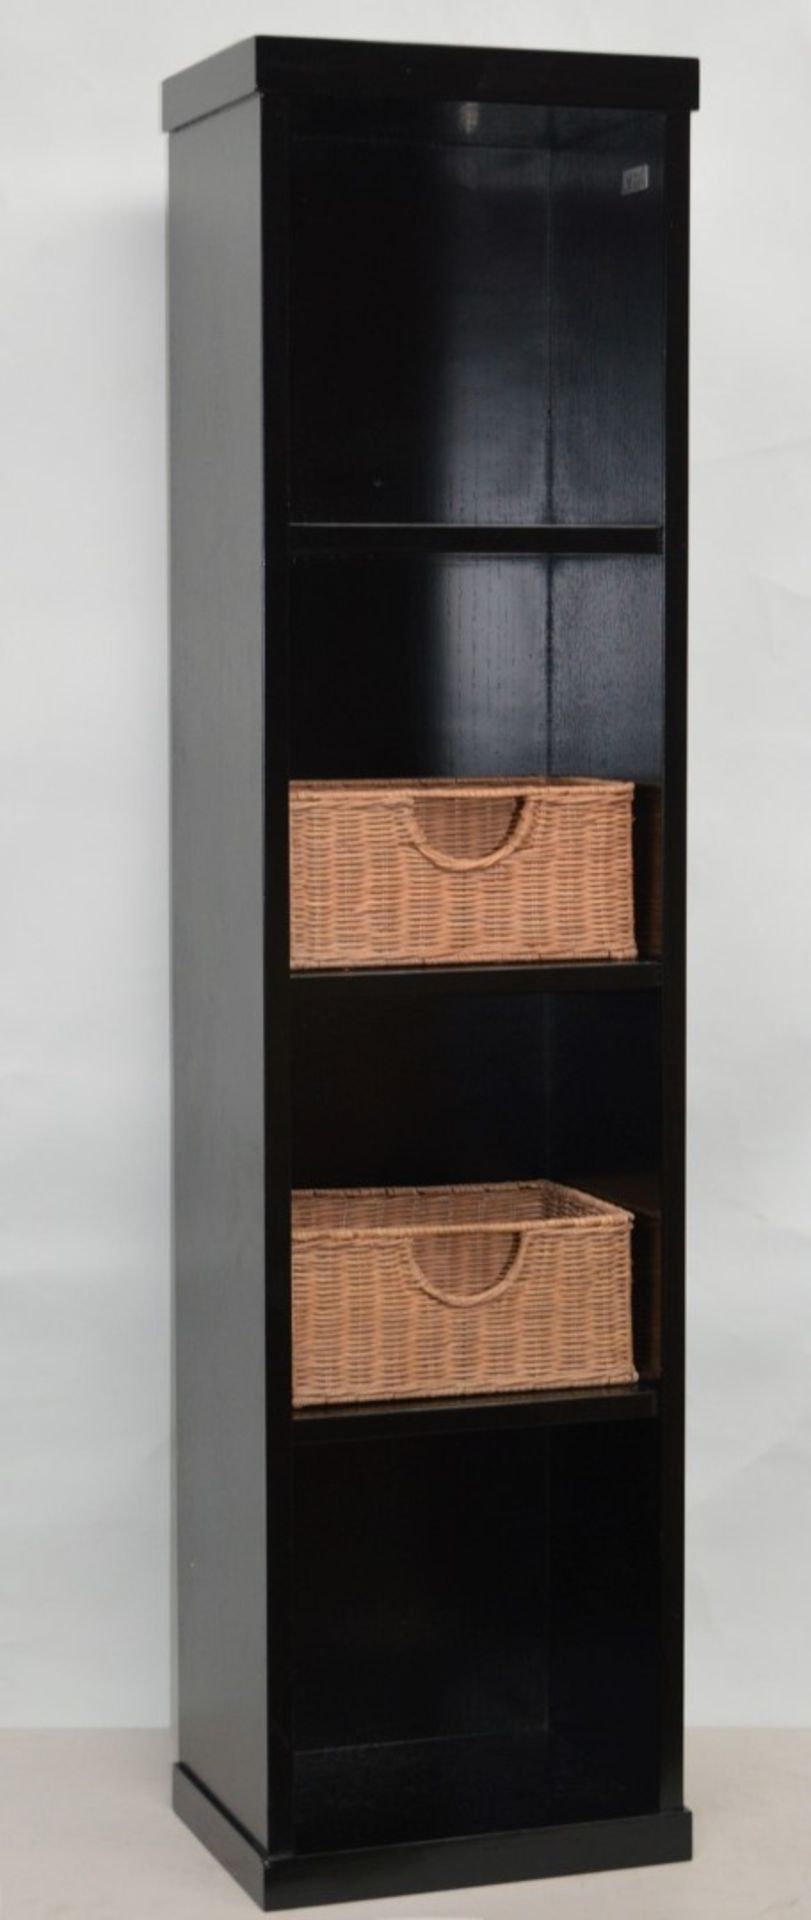 1 x Vogue ARC Series 2 Bathroom Storage Shelving Unit - Wall Mounted or Floor Standing - WENGE - Image 2 of 10